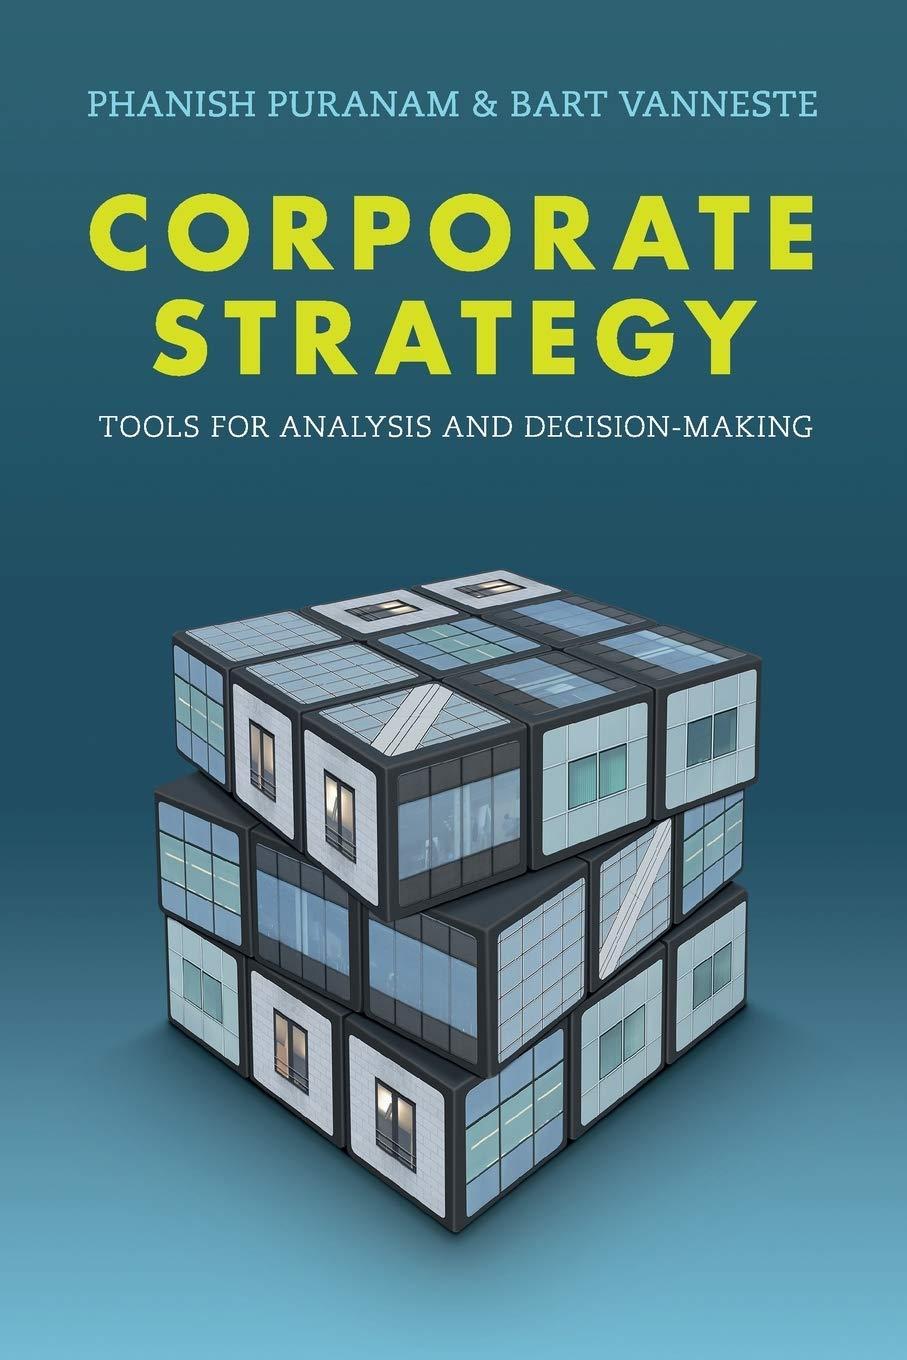 corporate strategy tools for analysis and decision making 1st edition phanish puranam, bart vanneste